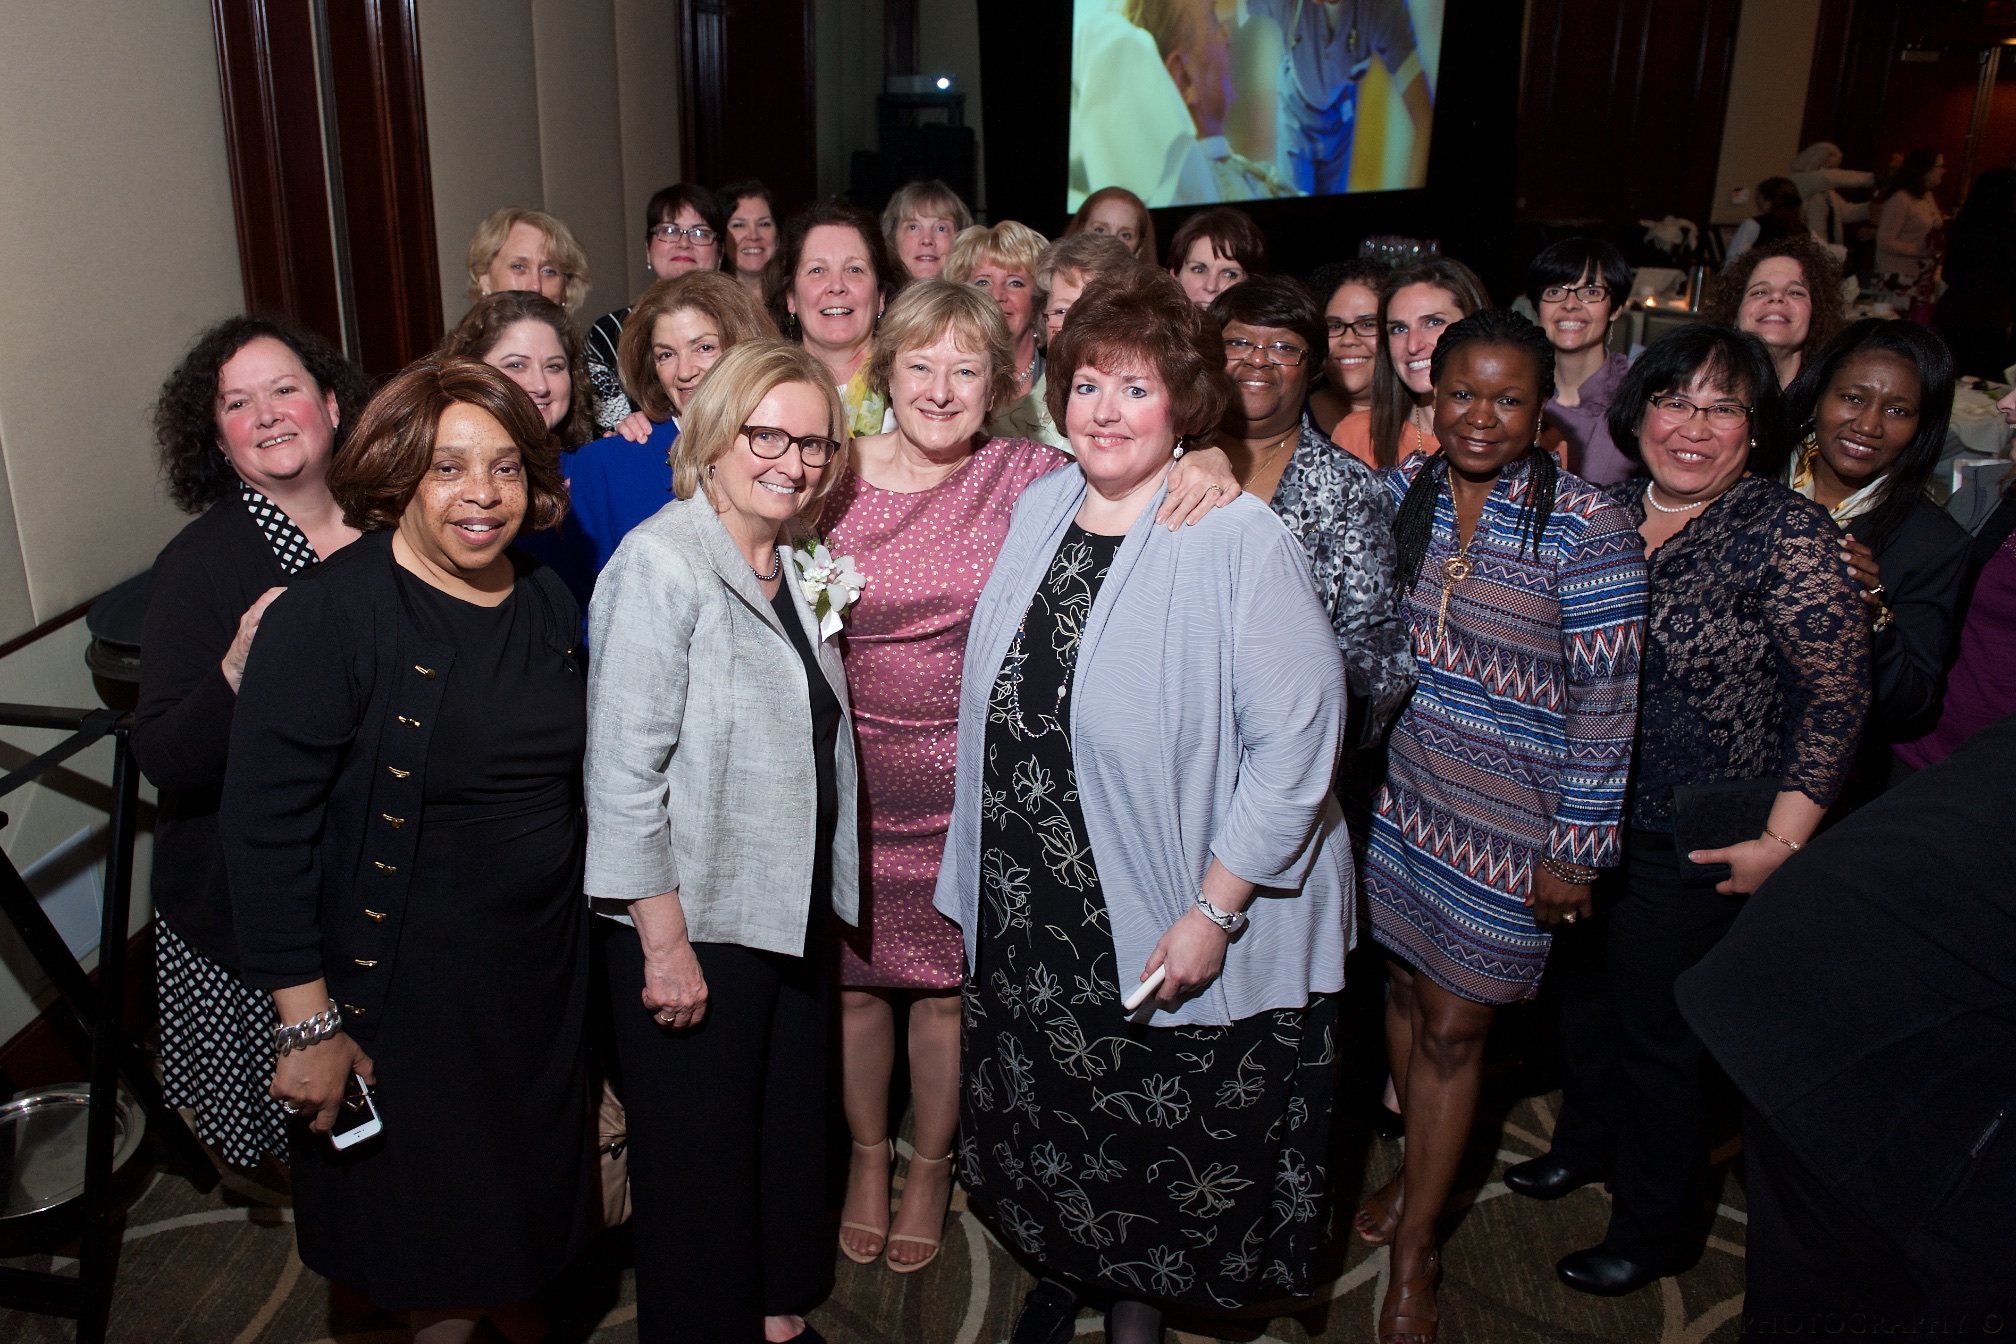 Nancy Kelleher (front row, second from left, in gray blazer) with colleagues at this year’s Nurse Recognition Dinner